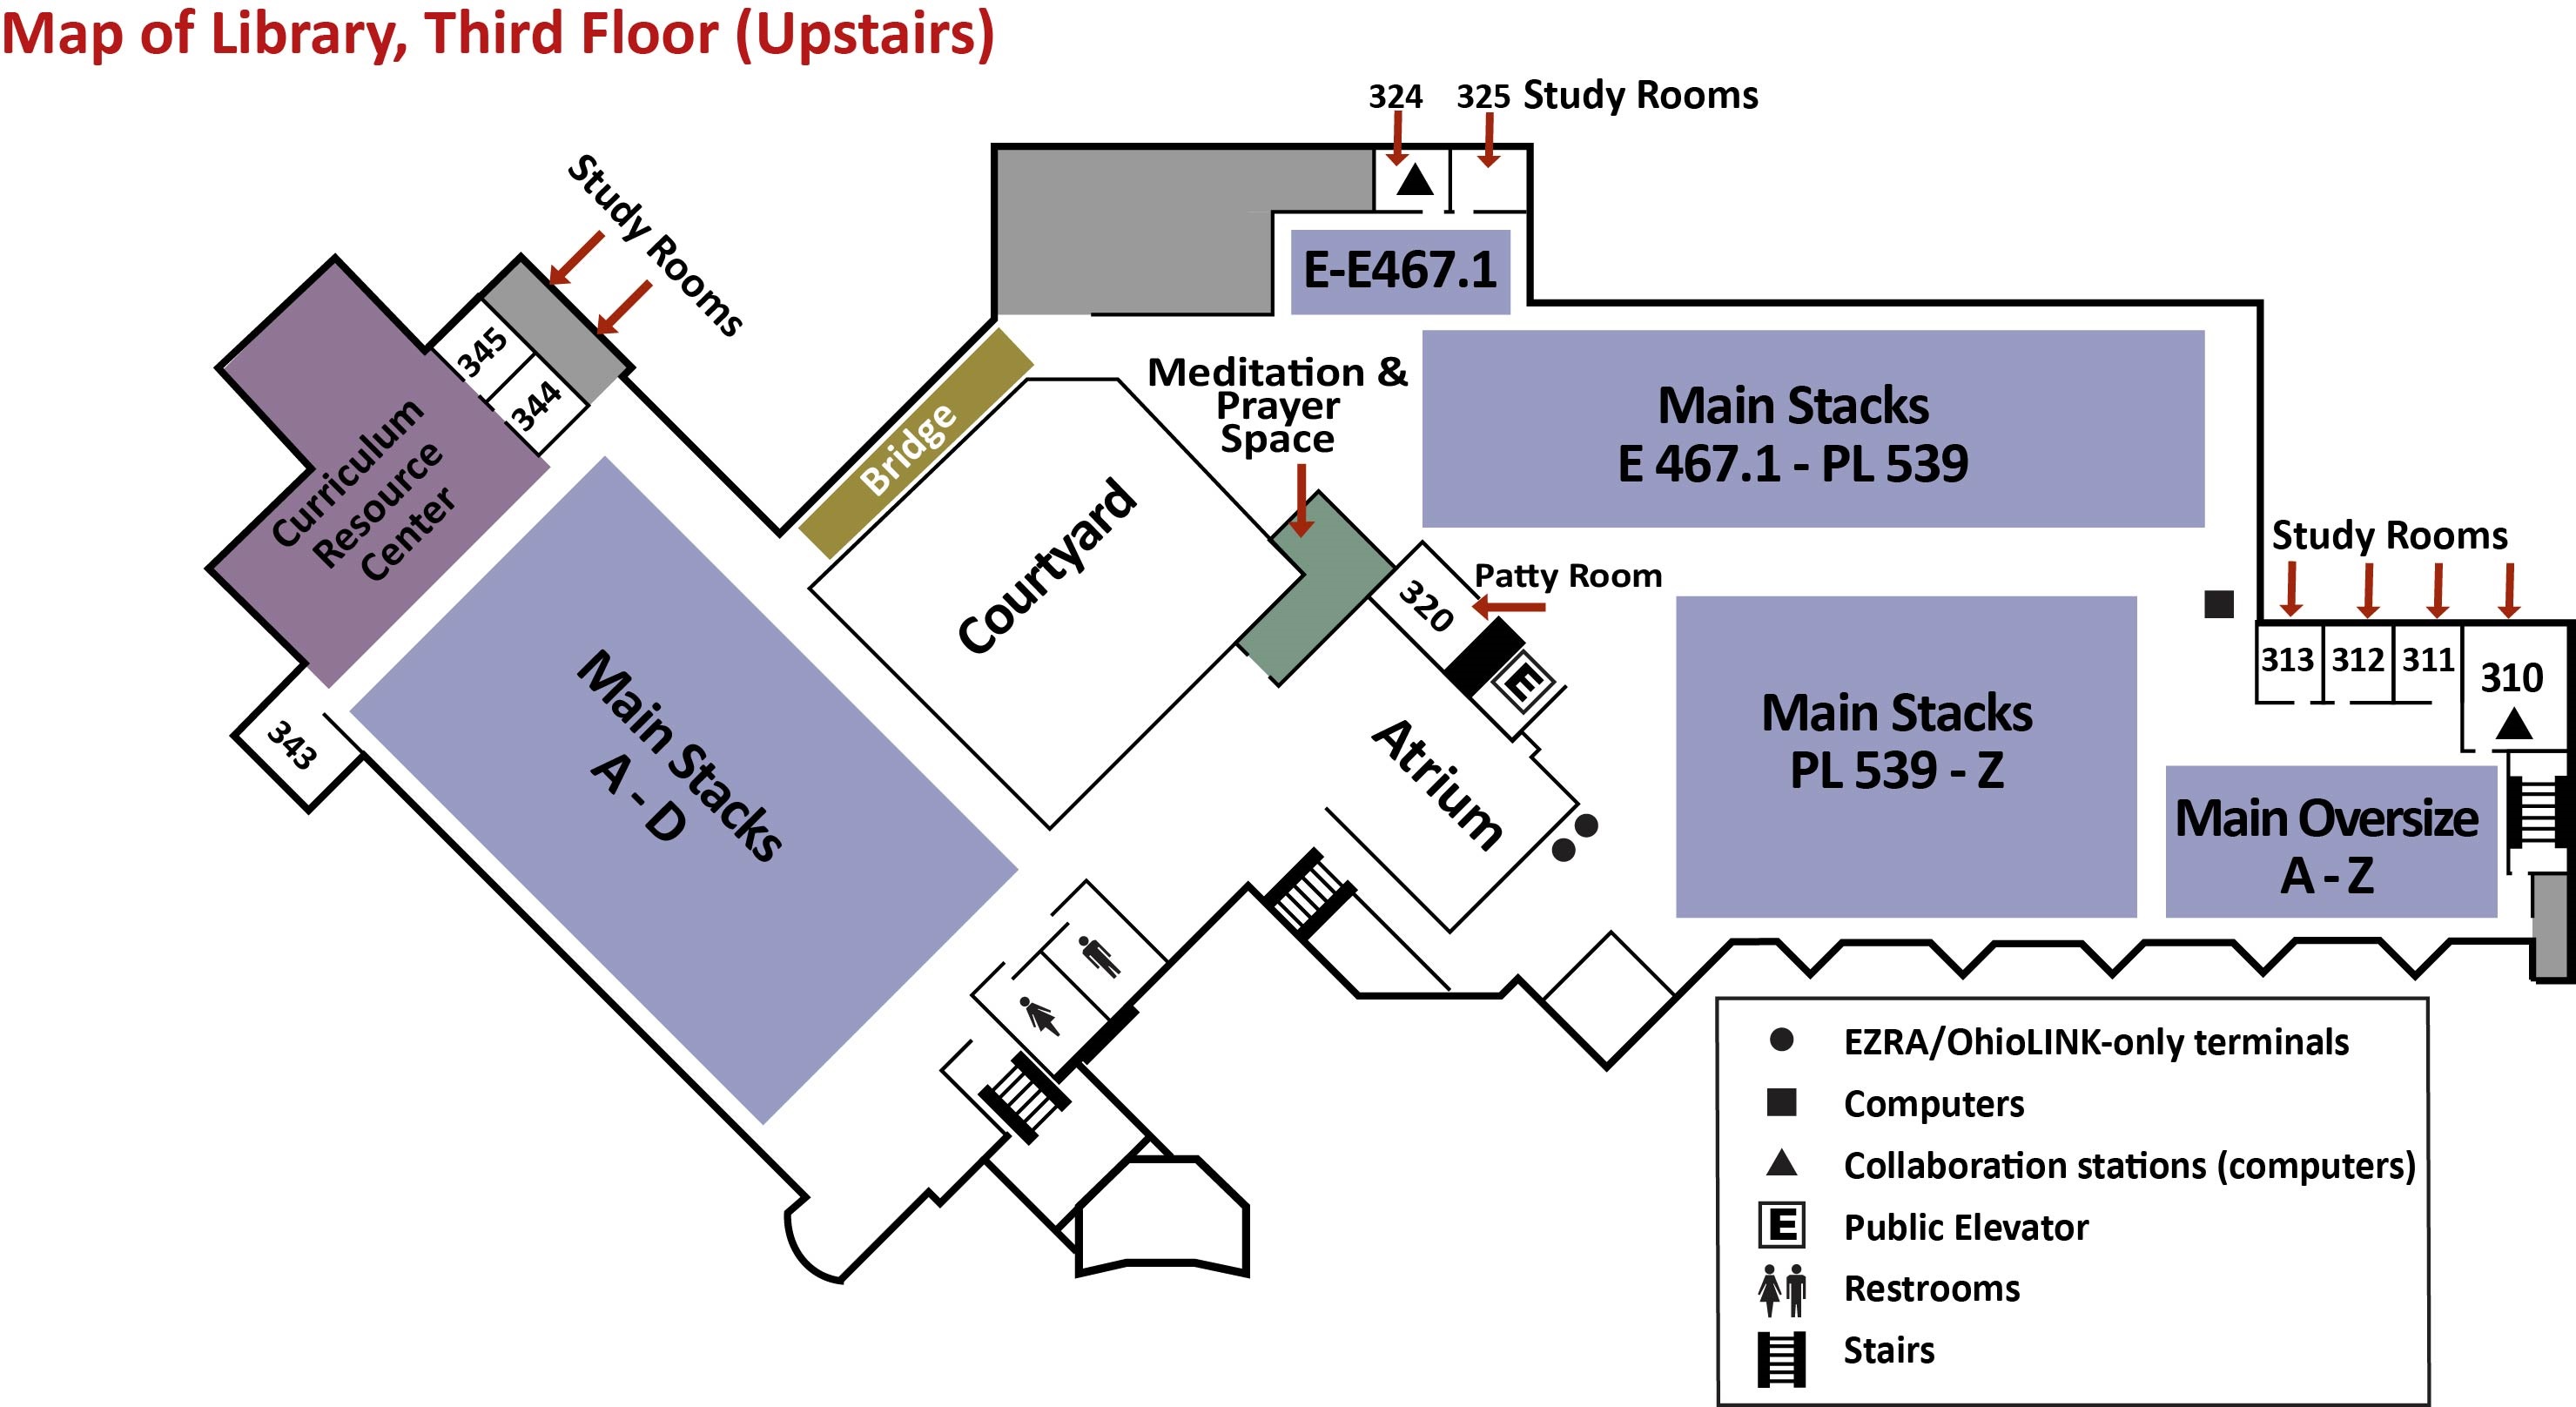 Map of the Library - Third Floor